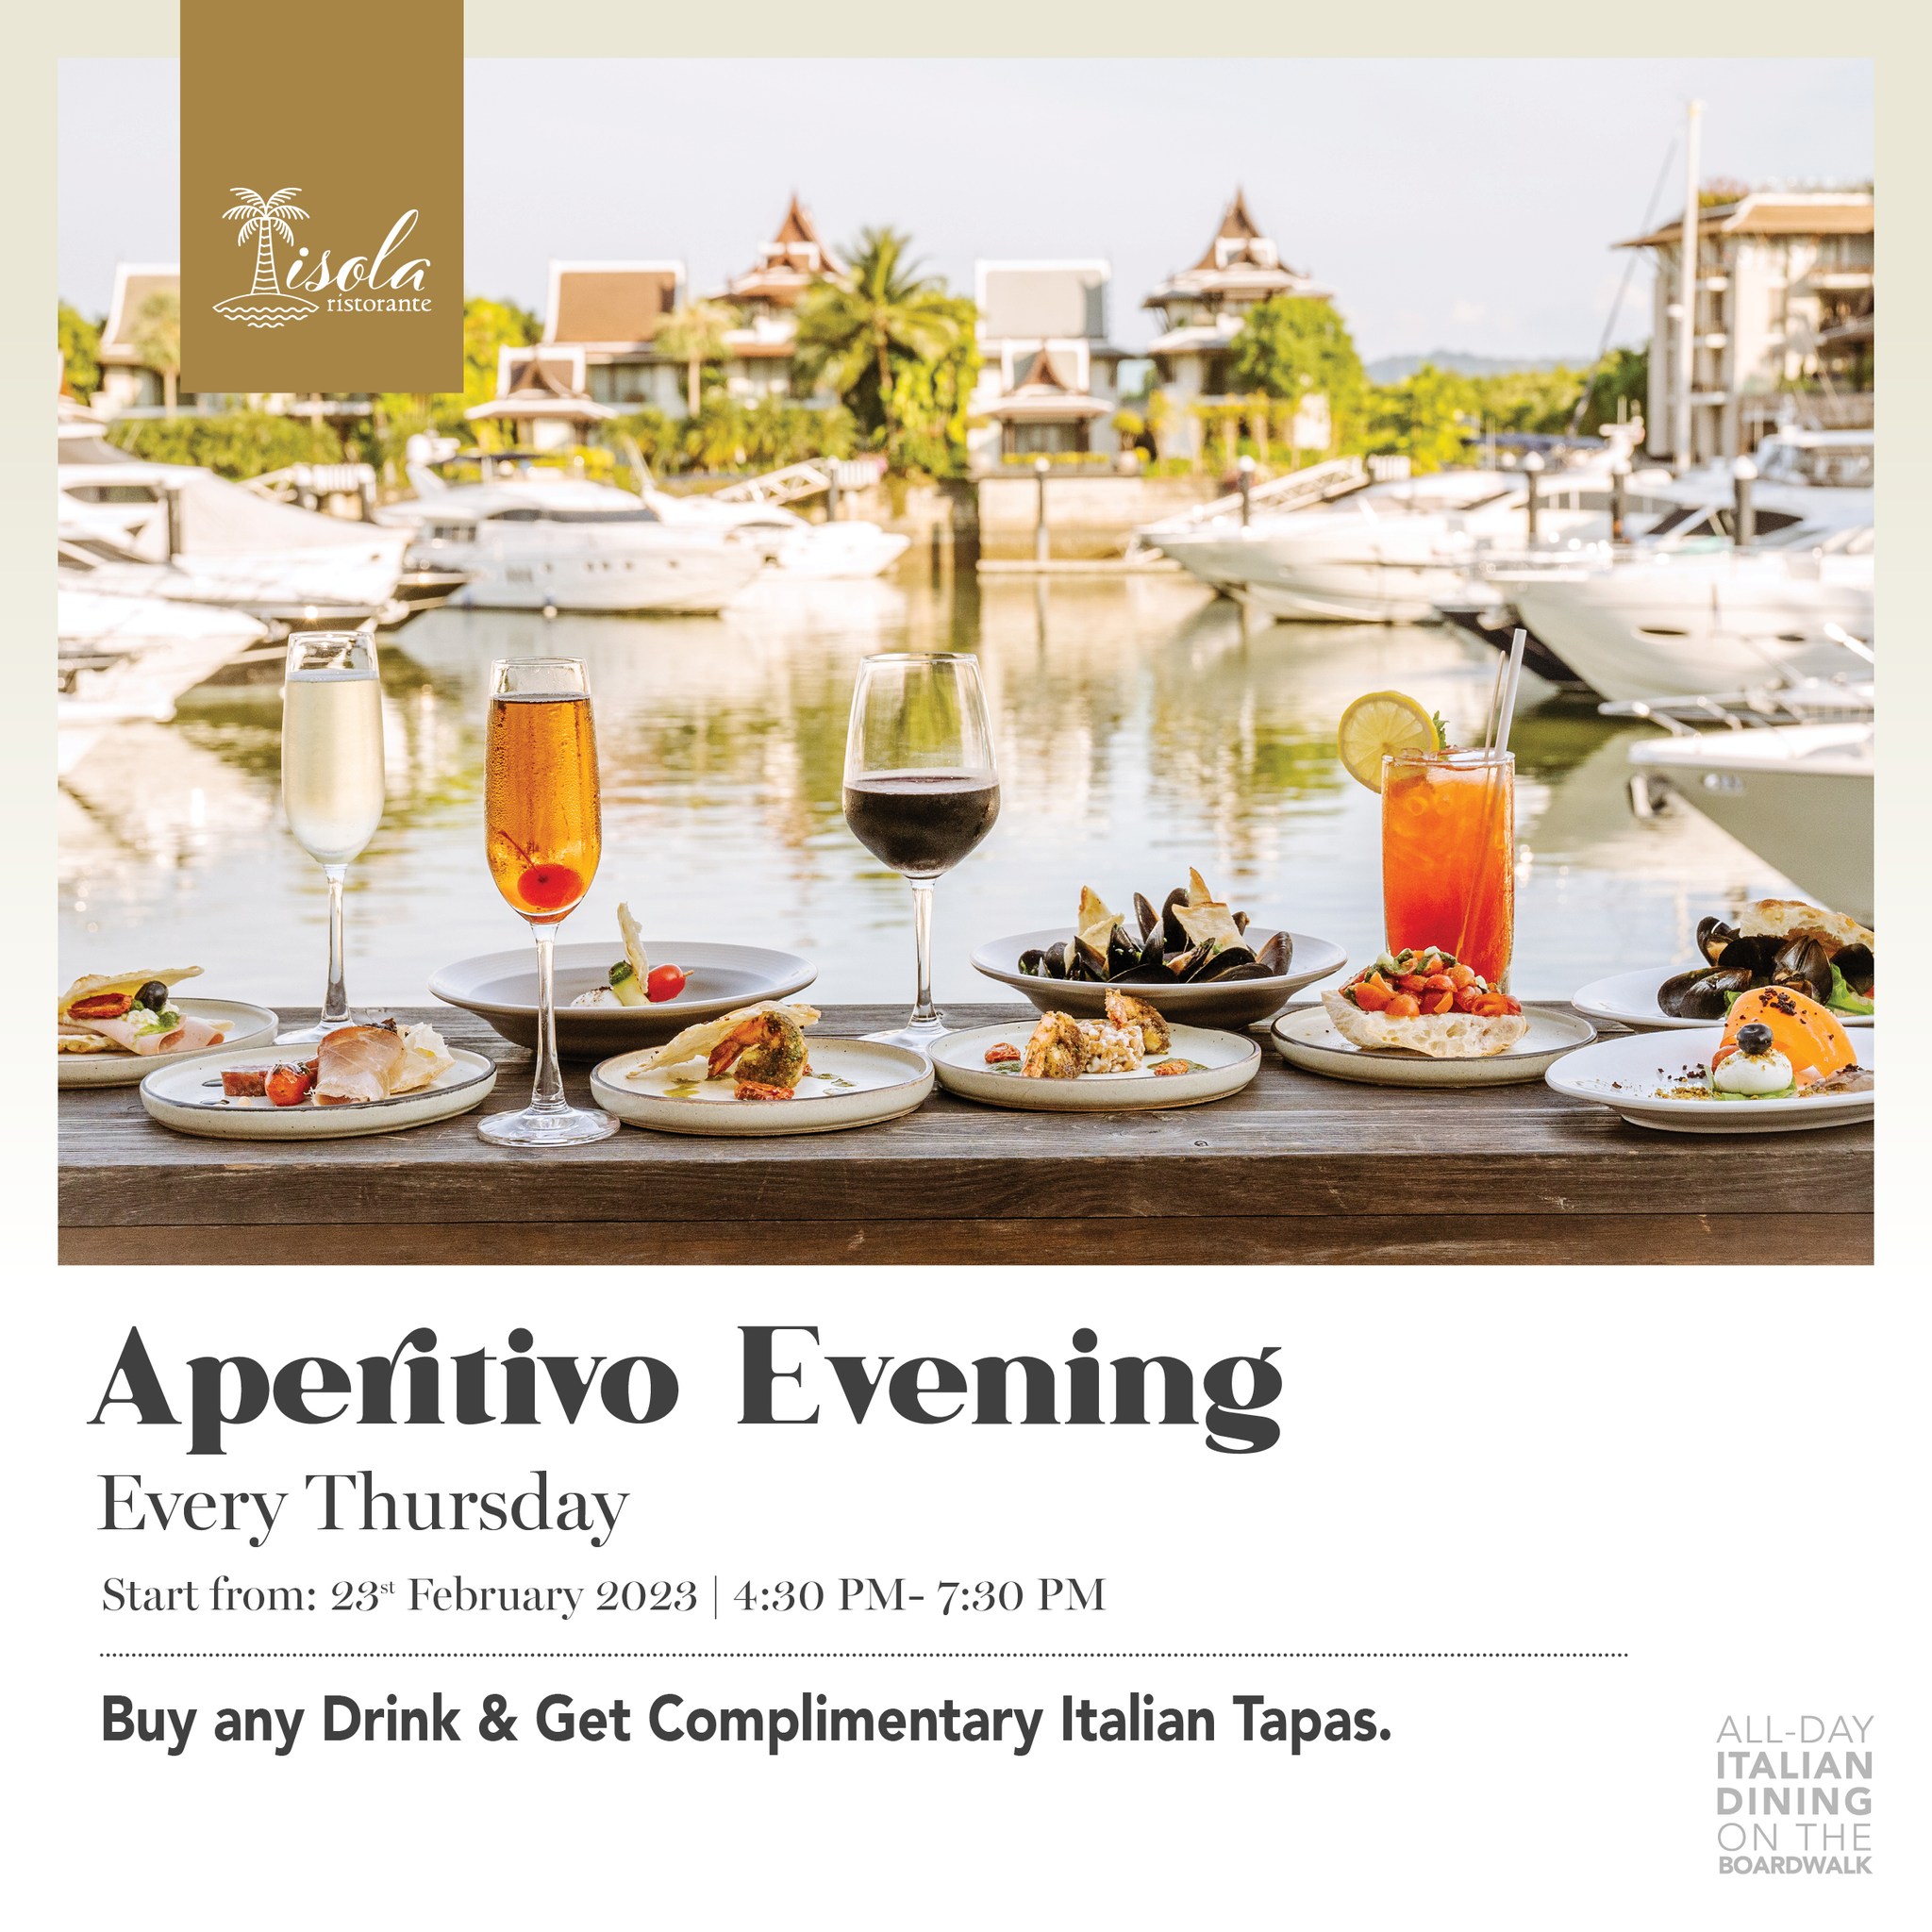 Isola Ristorante Restaurant - Aperitivo Evening - Get a complimentary set of Italian Tapas with every drink you order.